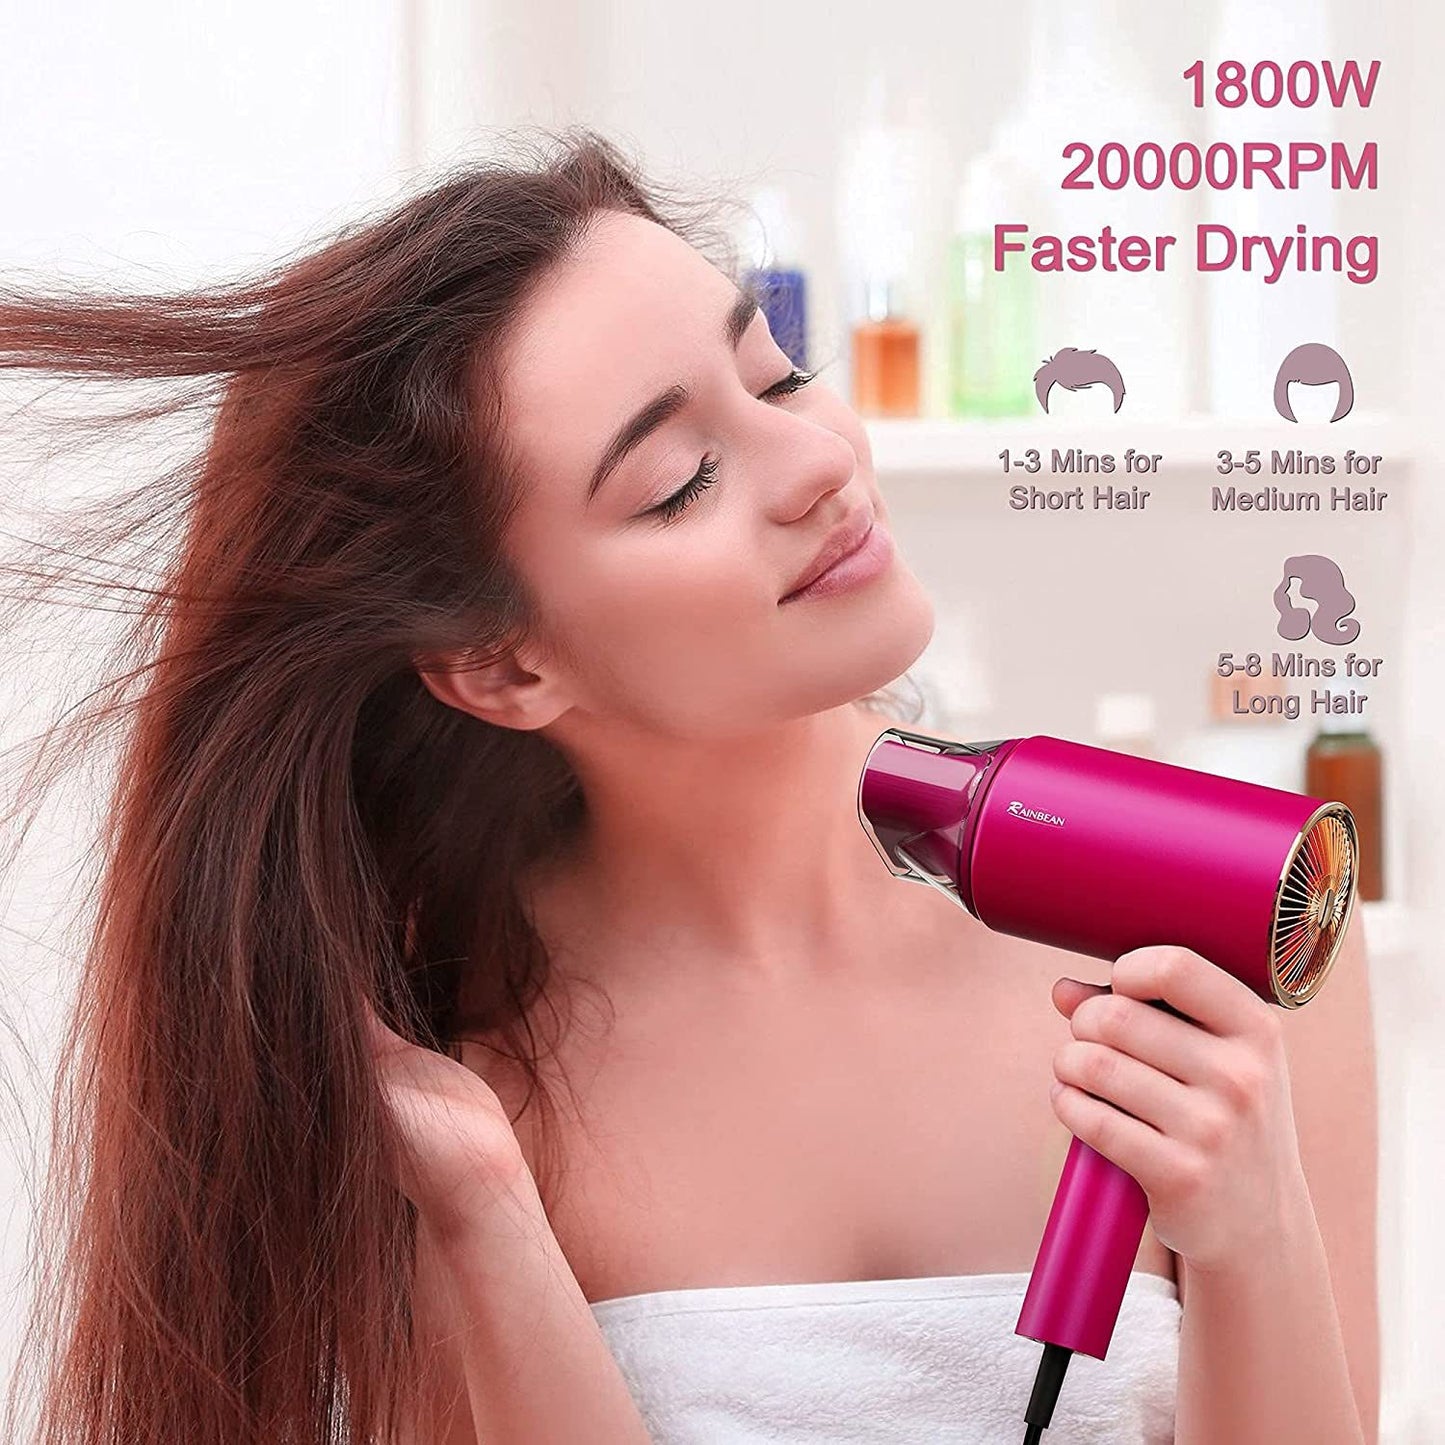 Water Ionic Hair Dryer, 1800W Blow Dryer with Magnetic Nozzle, 2 Speed and 3 Heat Settings, Powerful Low Noise Fast Drying Travel Hair Dryer for Home, Travel and Salon, Pink